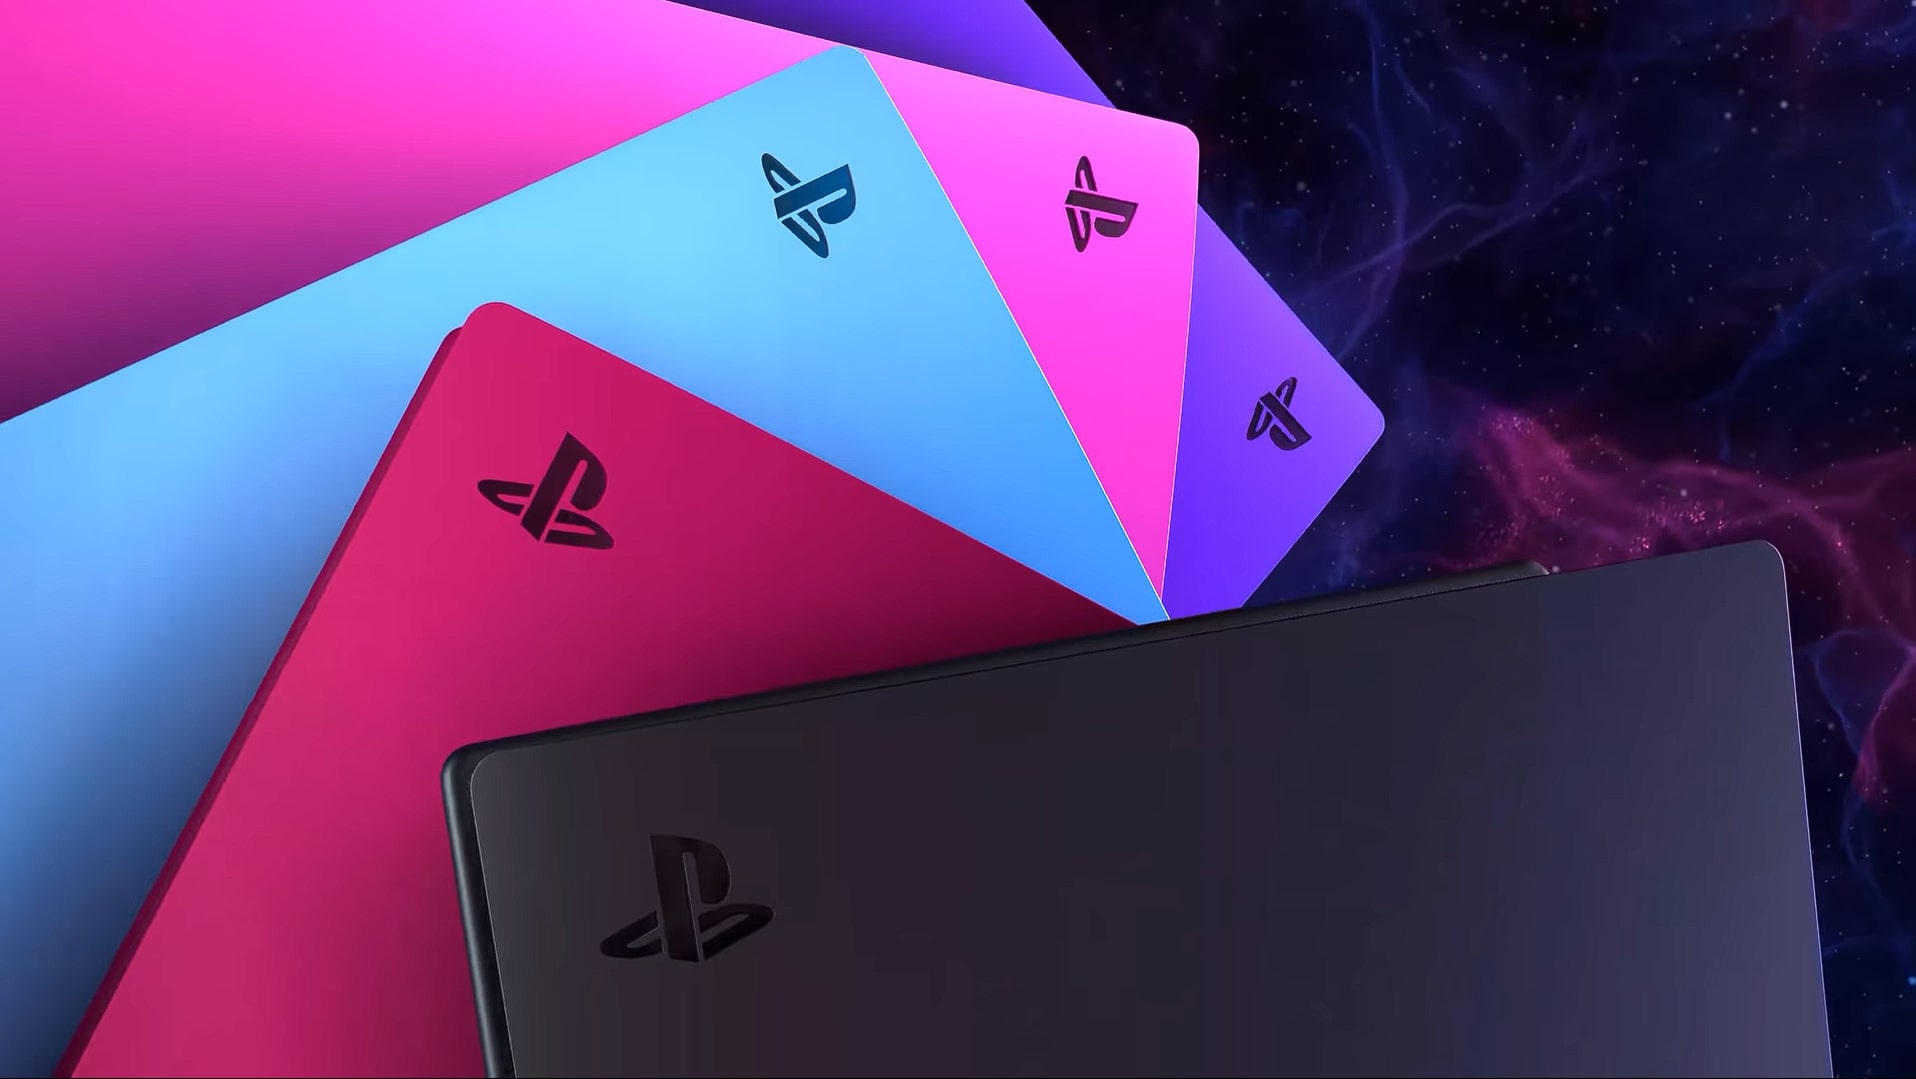 GameSpot - A new PS5 slim model hits shelves just in time for the